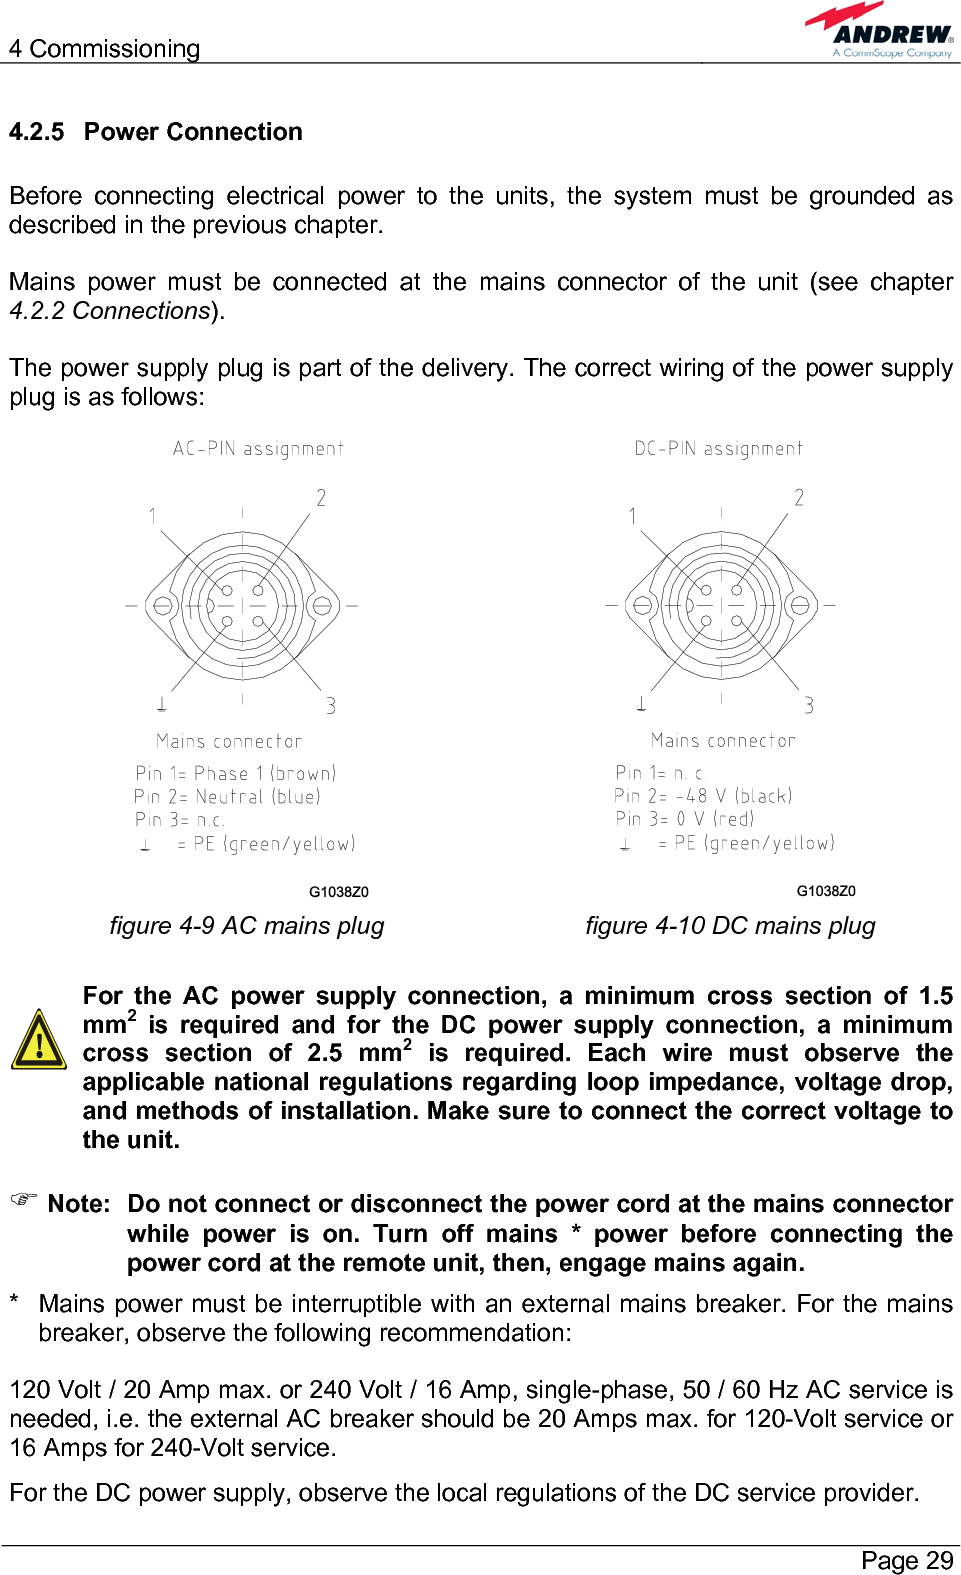 4 Commissioning       Page 29 4.2.5 Power Connection  Before connecting electrical power to the units, the system must be grounded as described in the previous chapter.  Mains power must be connected at the mains connector of the unit (see chapter 4.2.2 Connections).  The power supply plug is part of the delivery. The correct wiring of the power supply plug is as follows:    figure 4-9 AC mains plug  figure 4-10 DC mains plug    For the AC power supply connection, a minimum cross section of 1.5 mm2 is required and for the DC power supply connection, a minimum cross section of 2.5 mm2 is required. Each wire must observe the applicable national regulations regarding loop impedance, voltage drop, and methods of installation. Make sure to connect the correct voltage to the unit.  ) Note:  Do not connect or disconnect the power cord at the mains connector while power is on. Turn off mains * power before connecting the power cord at the remote unit, then, engage mains again. *   Mains power must be interruptible with an external mains breaker. For the mains breaker, observe the following recommendation:  120 Volt / 20 Amp max. or 240 Volt / 16 Amp, single-phase, 50 / 60 Hz AC service is needed, i.e. the external AC breaker should be 20 Amps max. for 120-Volt service or 16 Amps for 240-Volt service. For the DC power supply, observe the local regulations of the DC service provider. 